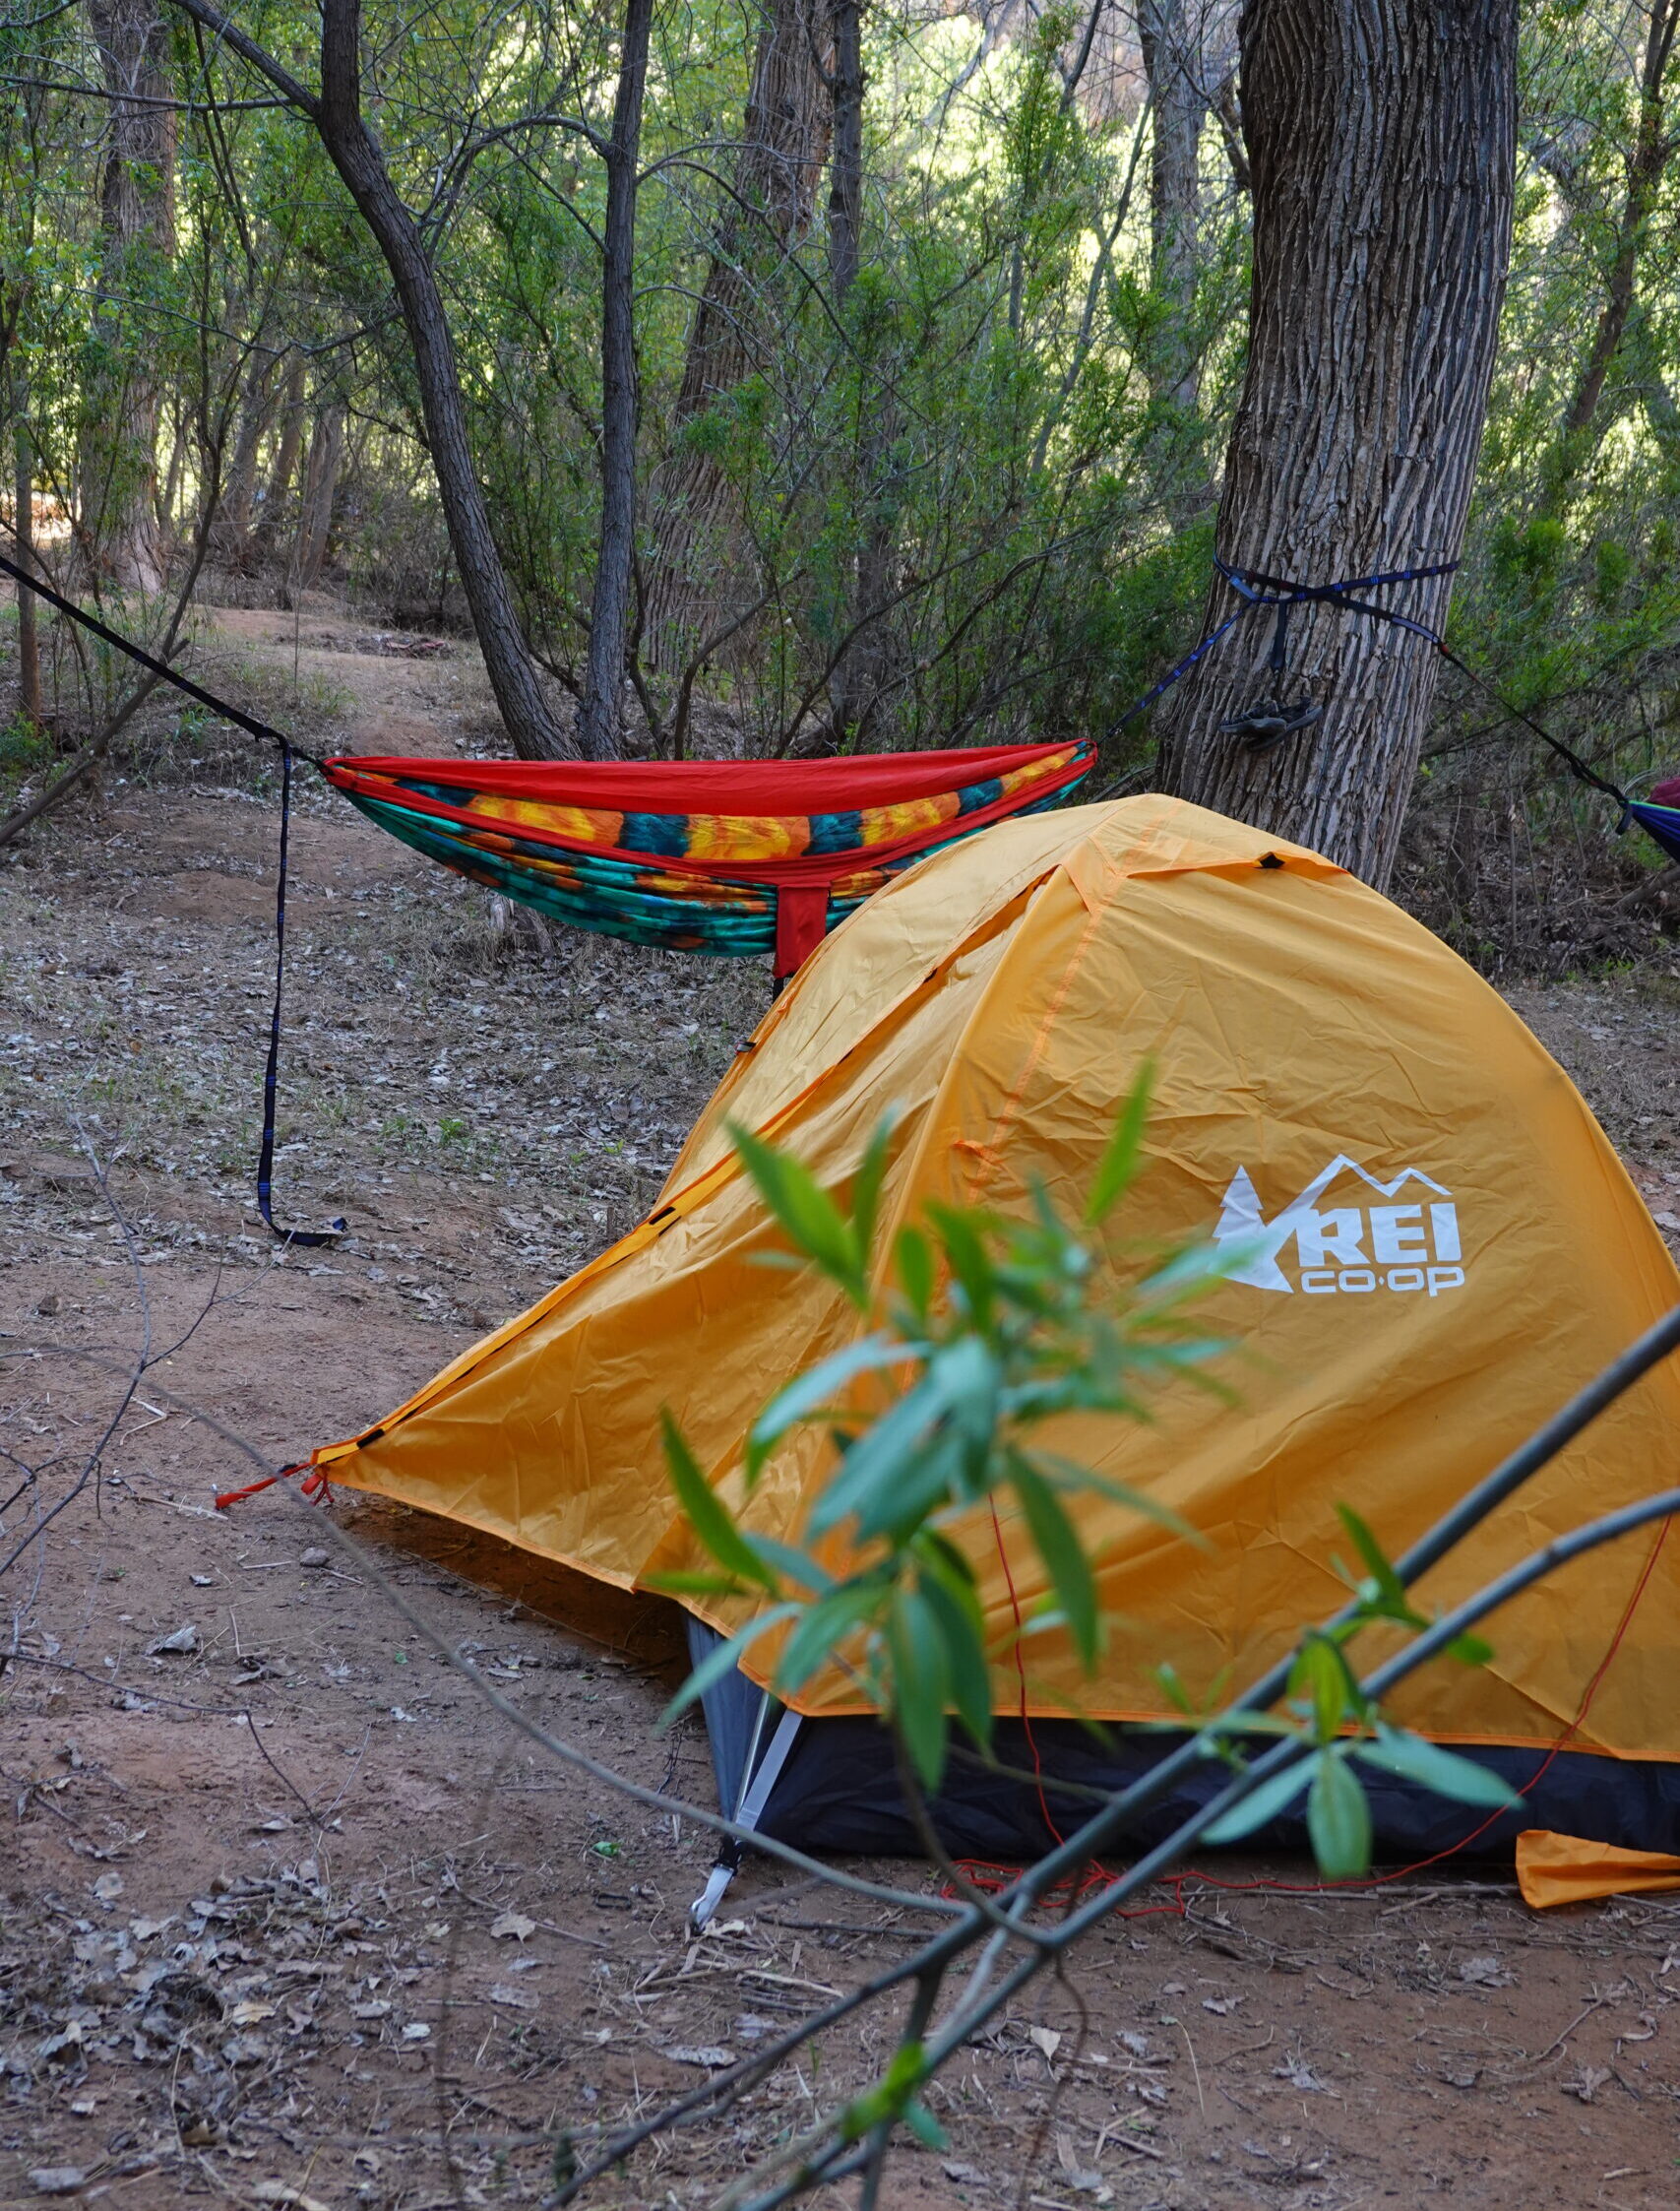 orange tent and hammock at a campsite